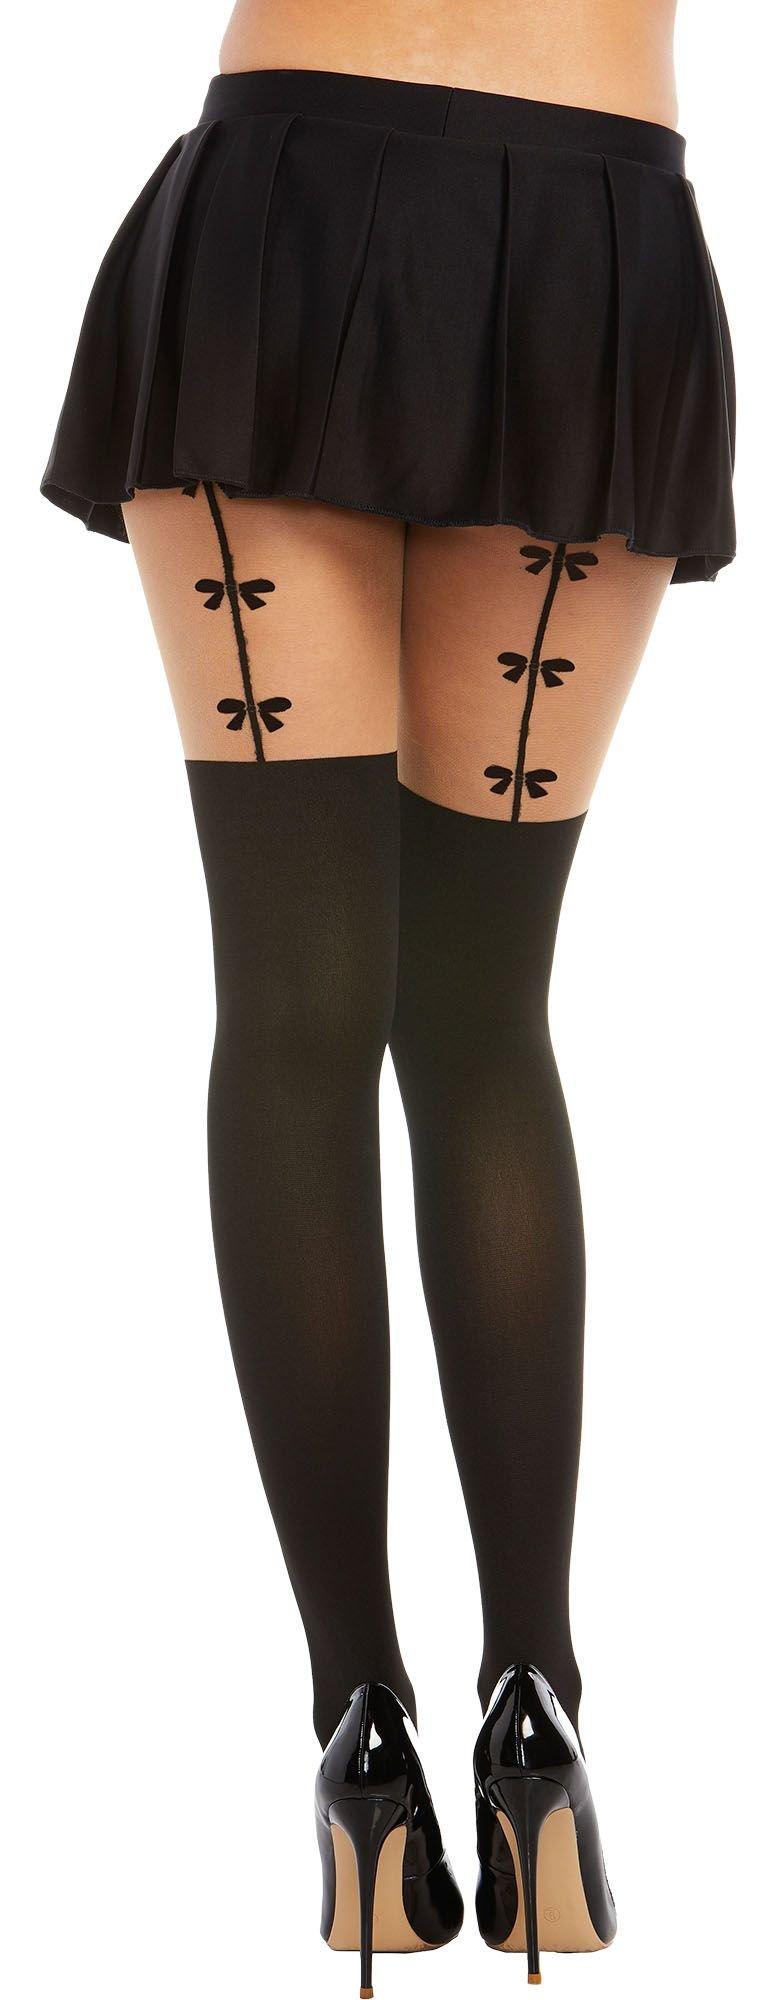 Black Opaque Pantyhose for Adults with Bow Garter | Party City